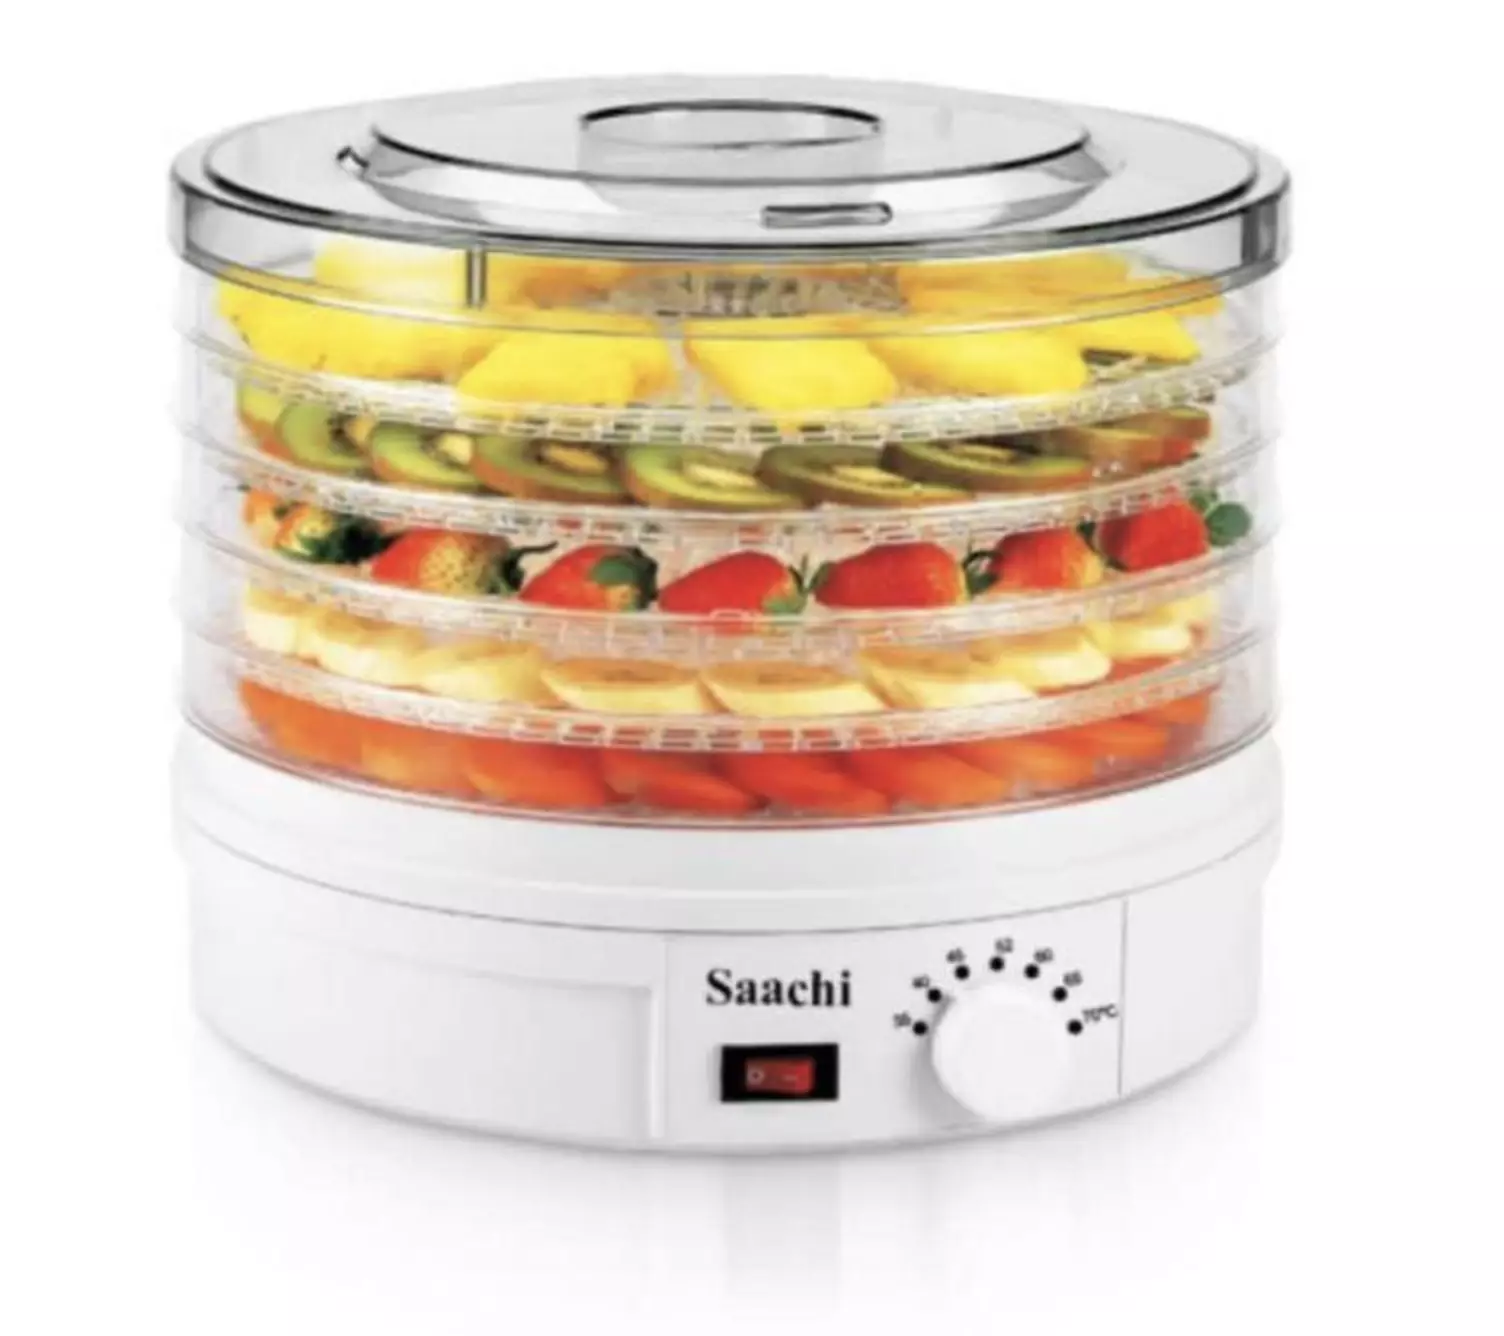 Saachi food dryer dehydrator with 5 trays food processors fruit,and vegetable dryer machine food grade as food dehydrator